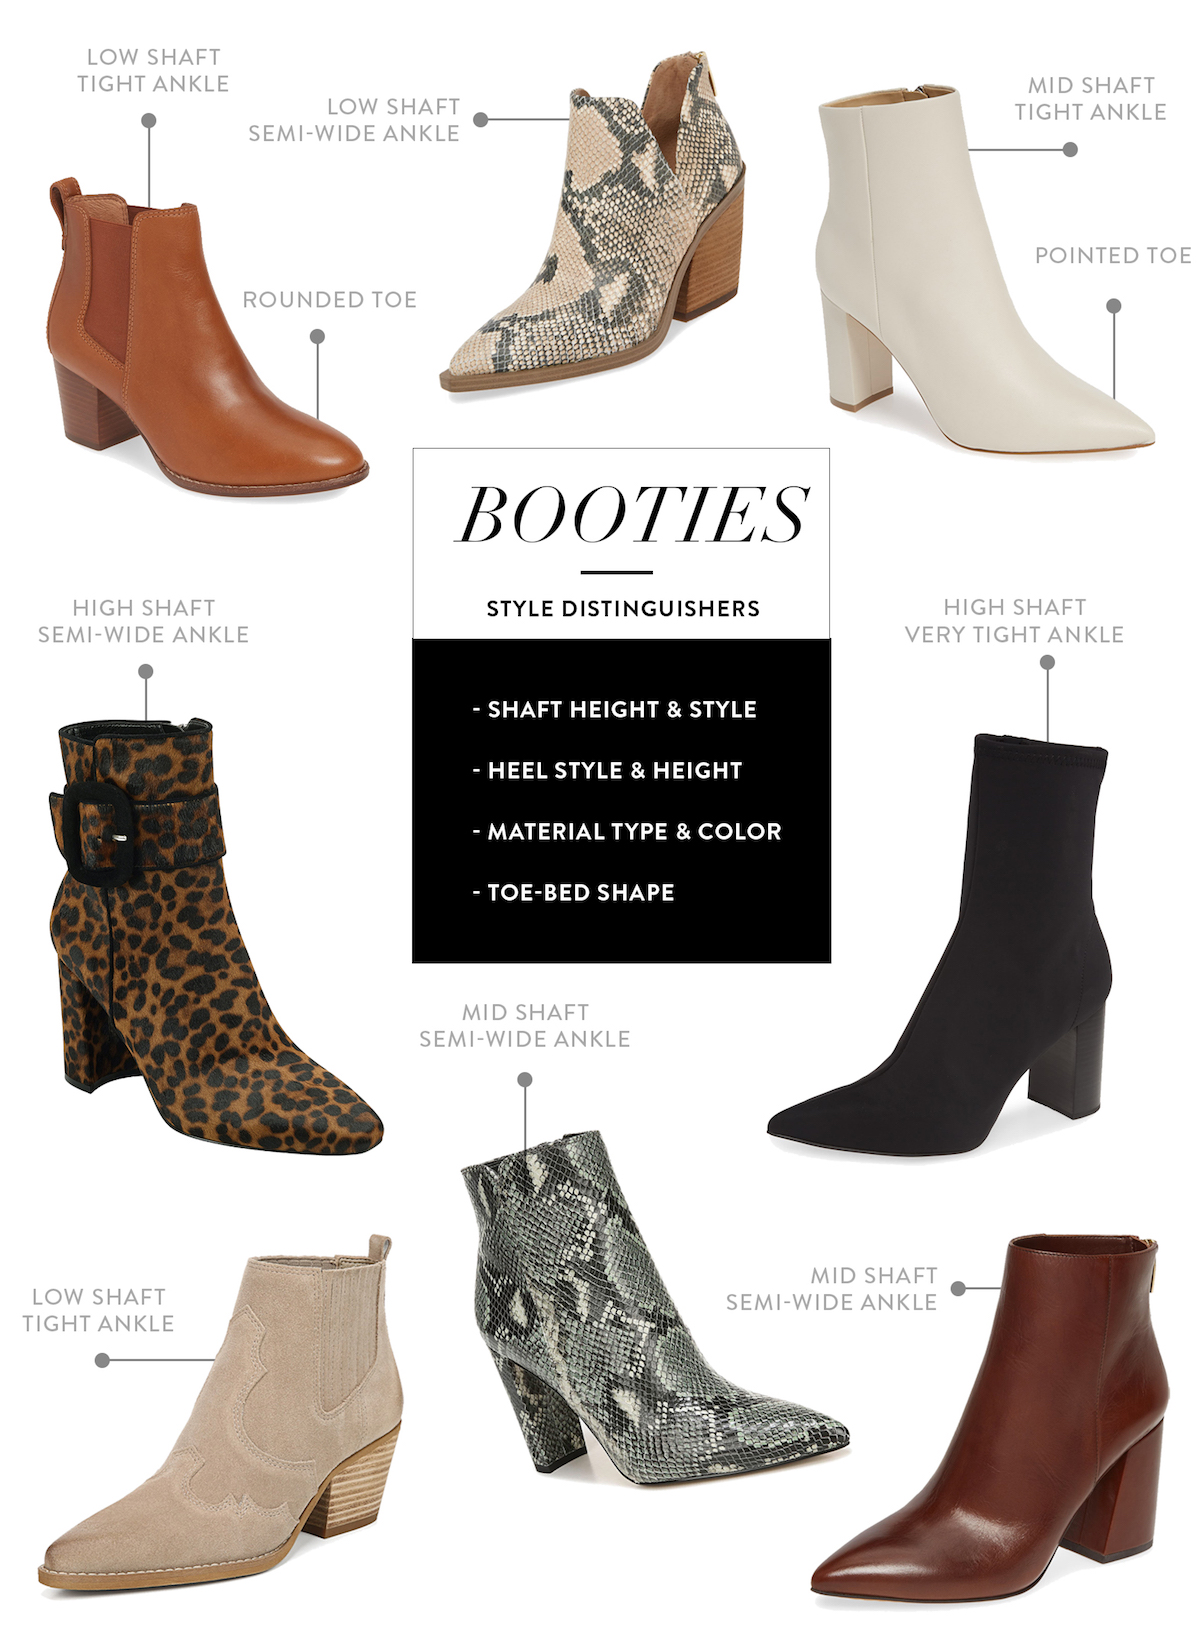 How To Wear Ankle Boots & Booties - Everything You Need To Know